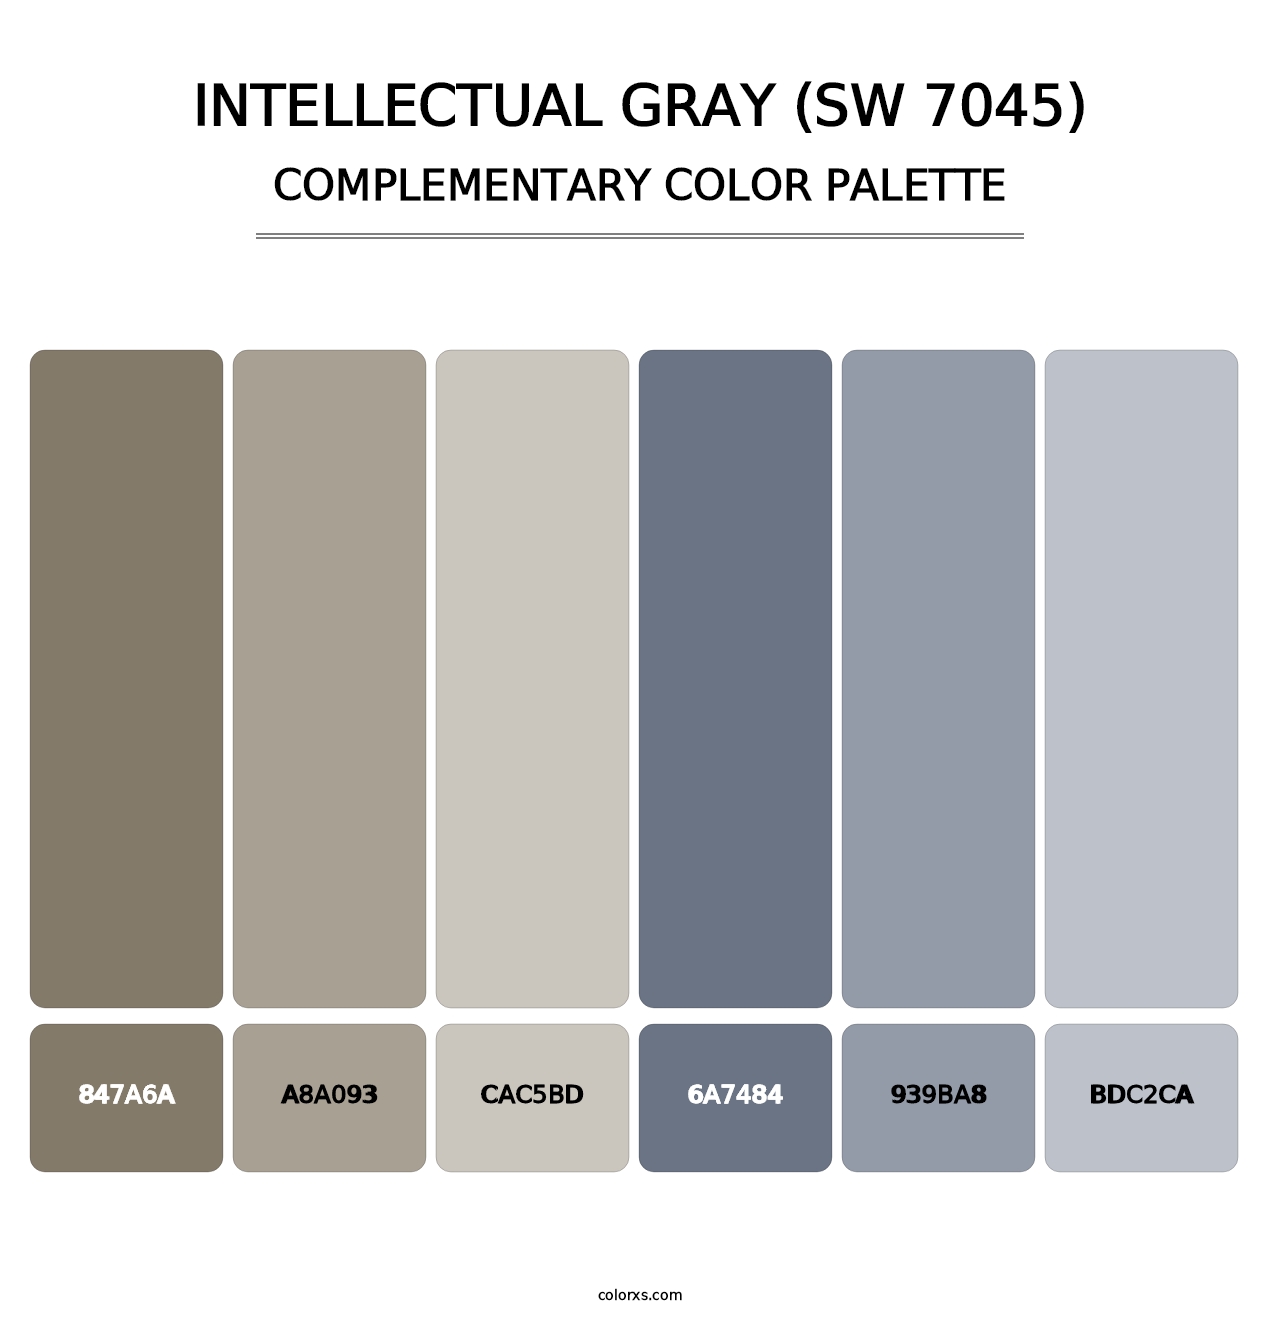 Intellectual Gray (SW 7045) - Complementary Color Palette